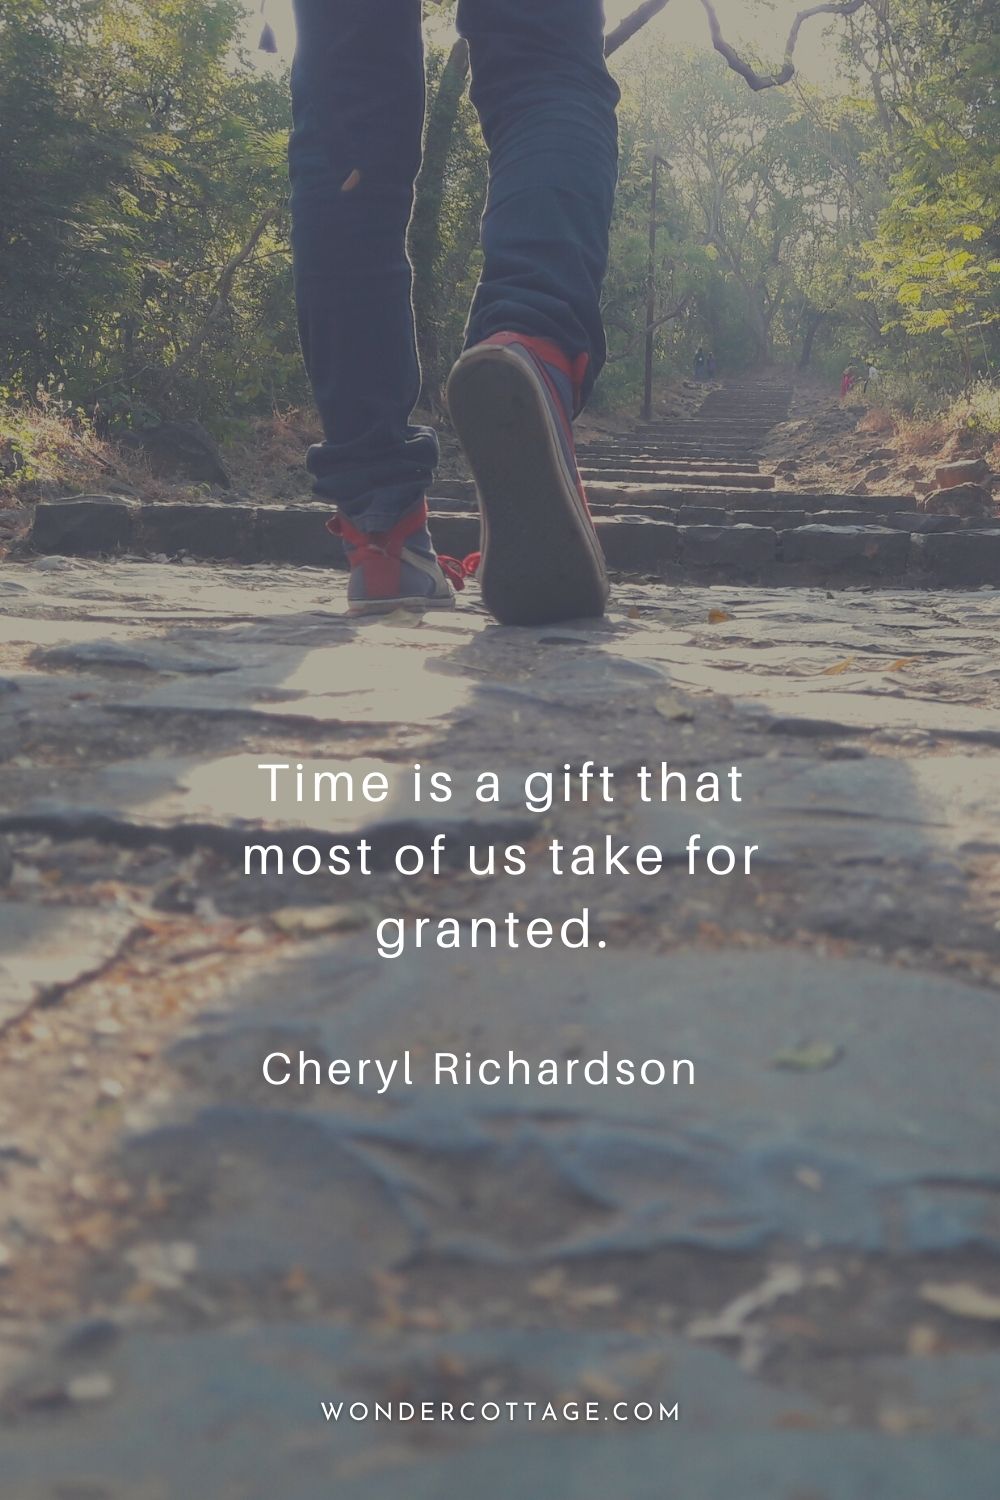 Time is a gift that most of us take for granted. Cheryl Richardson
Time Quotes